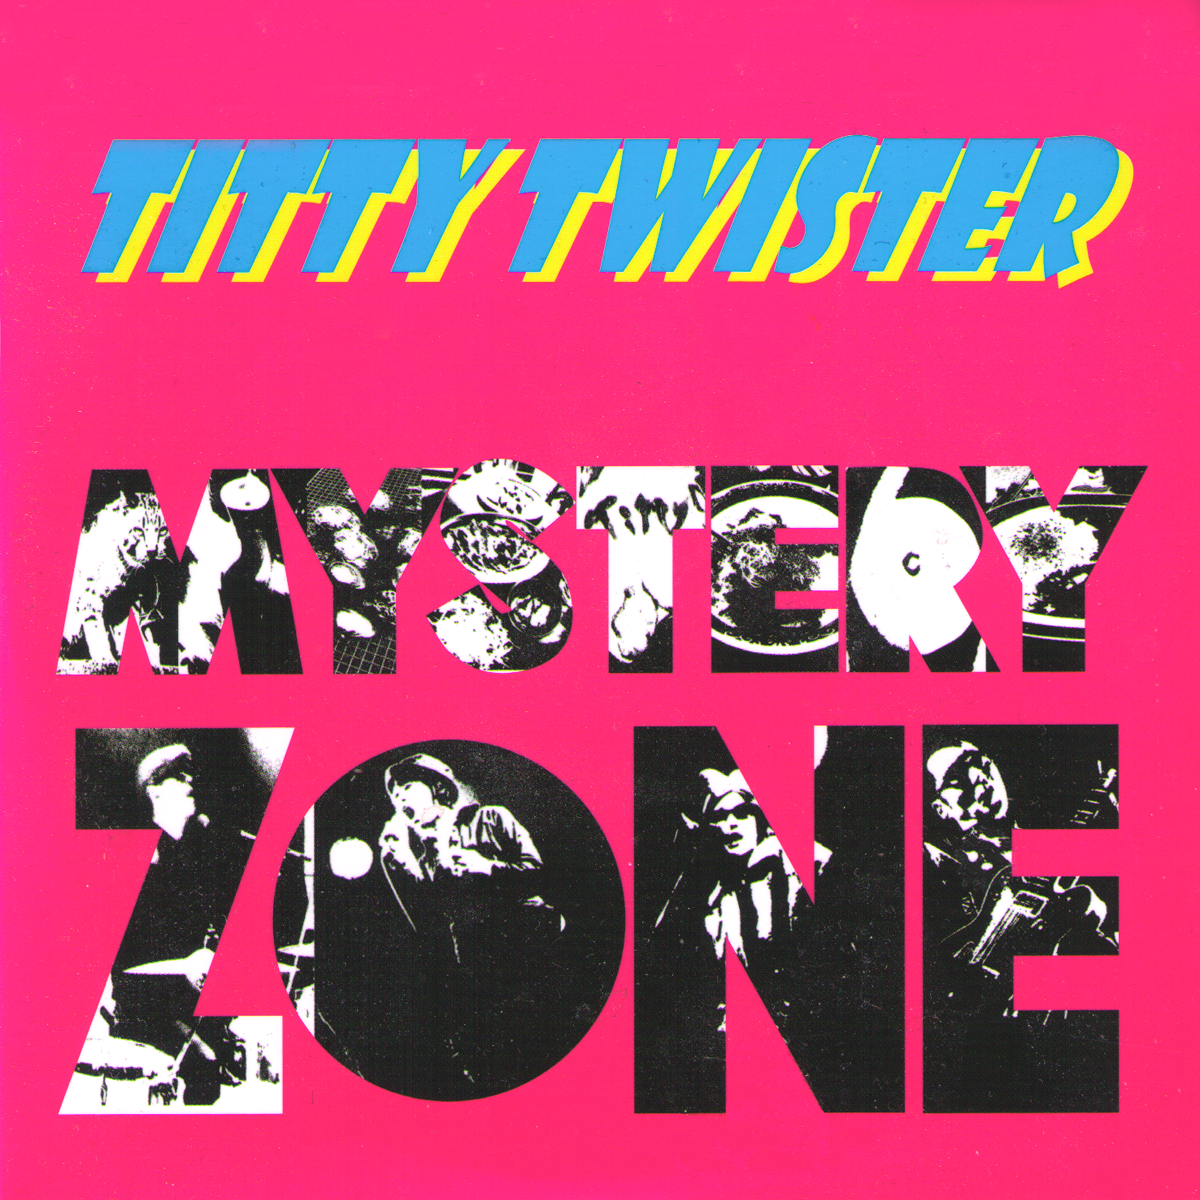 Titty Twister- Mystery Zone CD ~NIKKI AND THE CORVETTES!